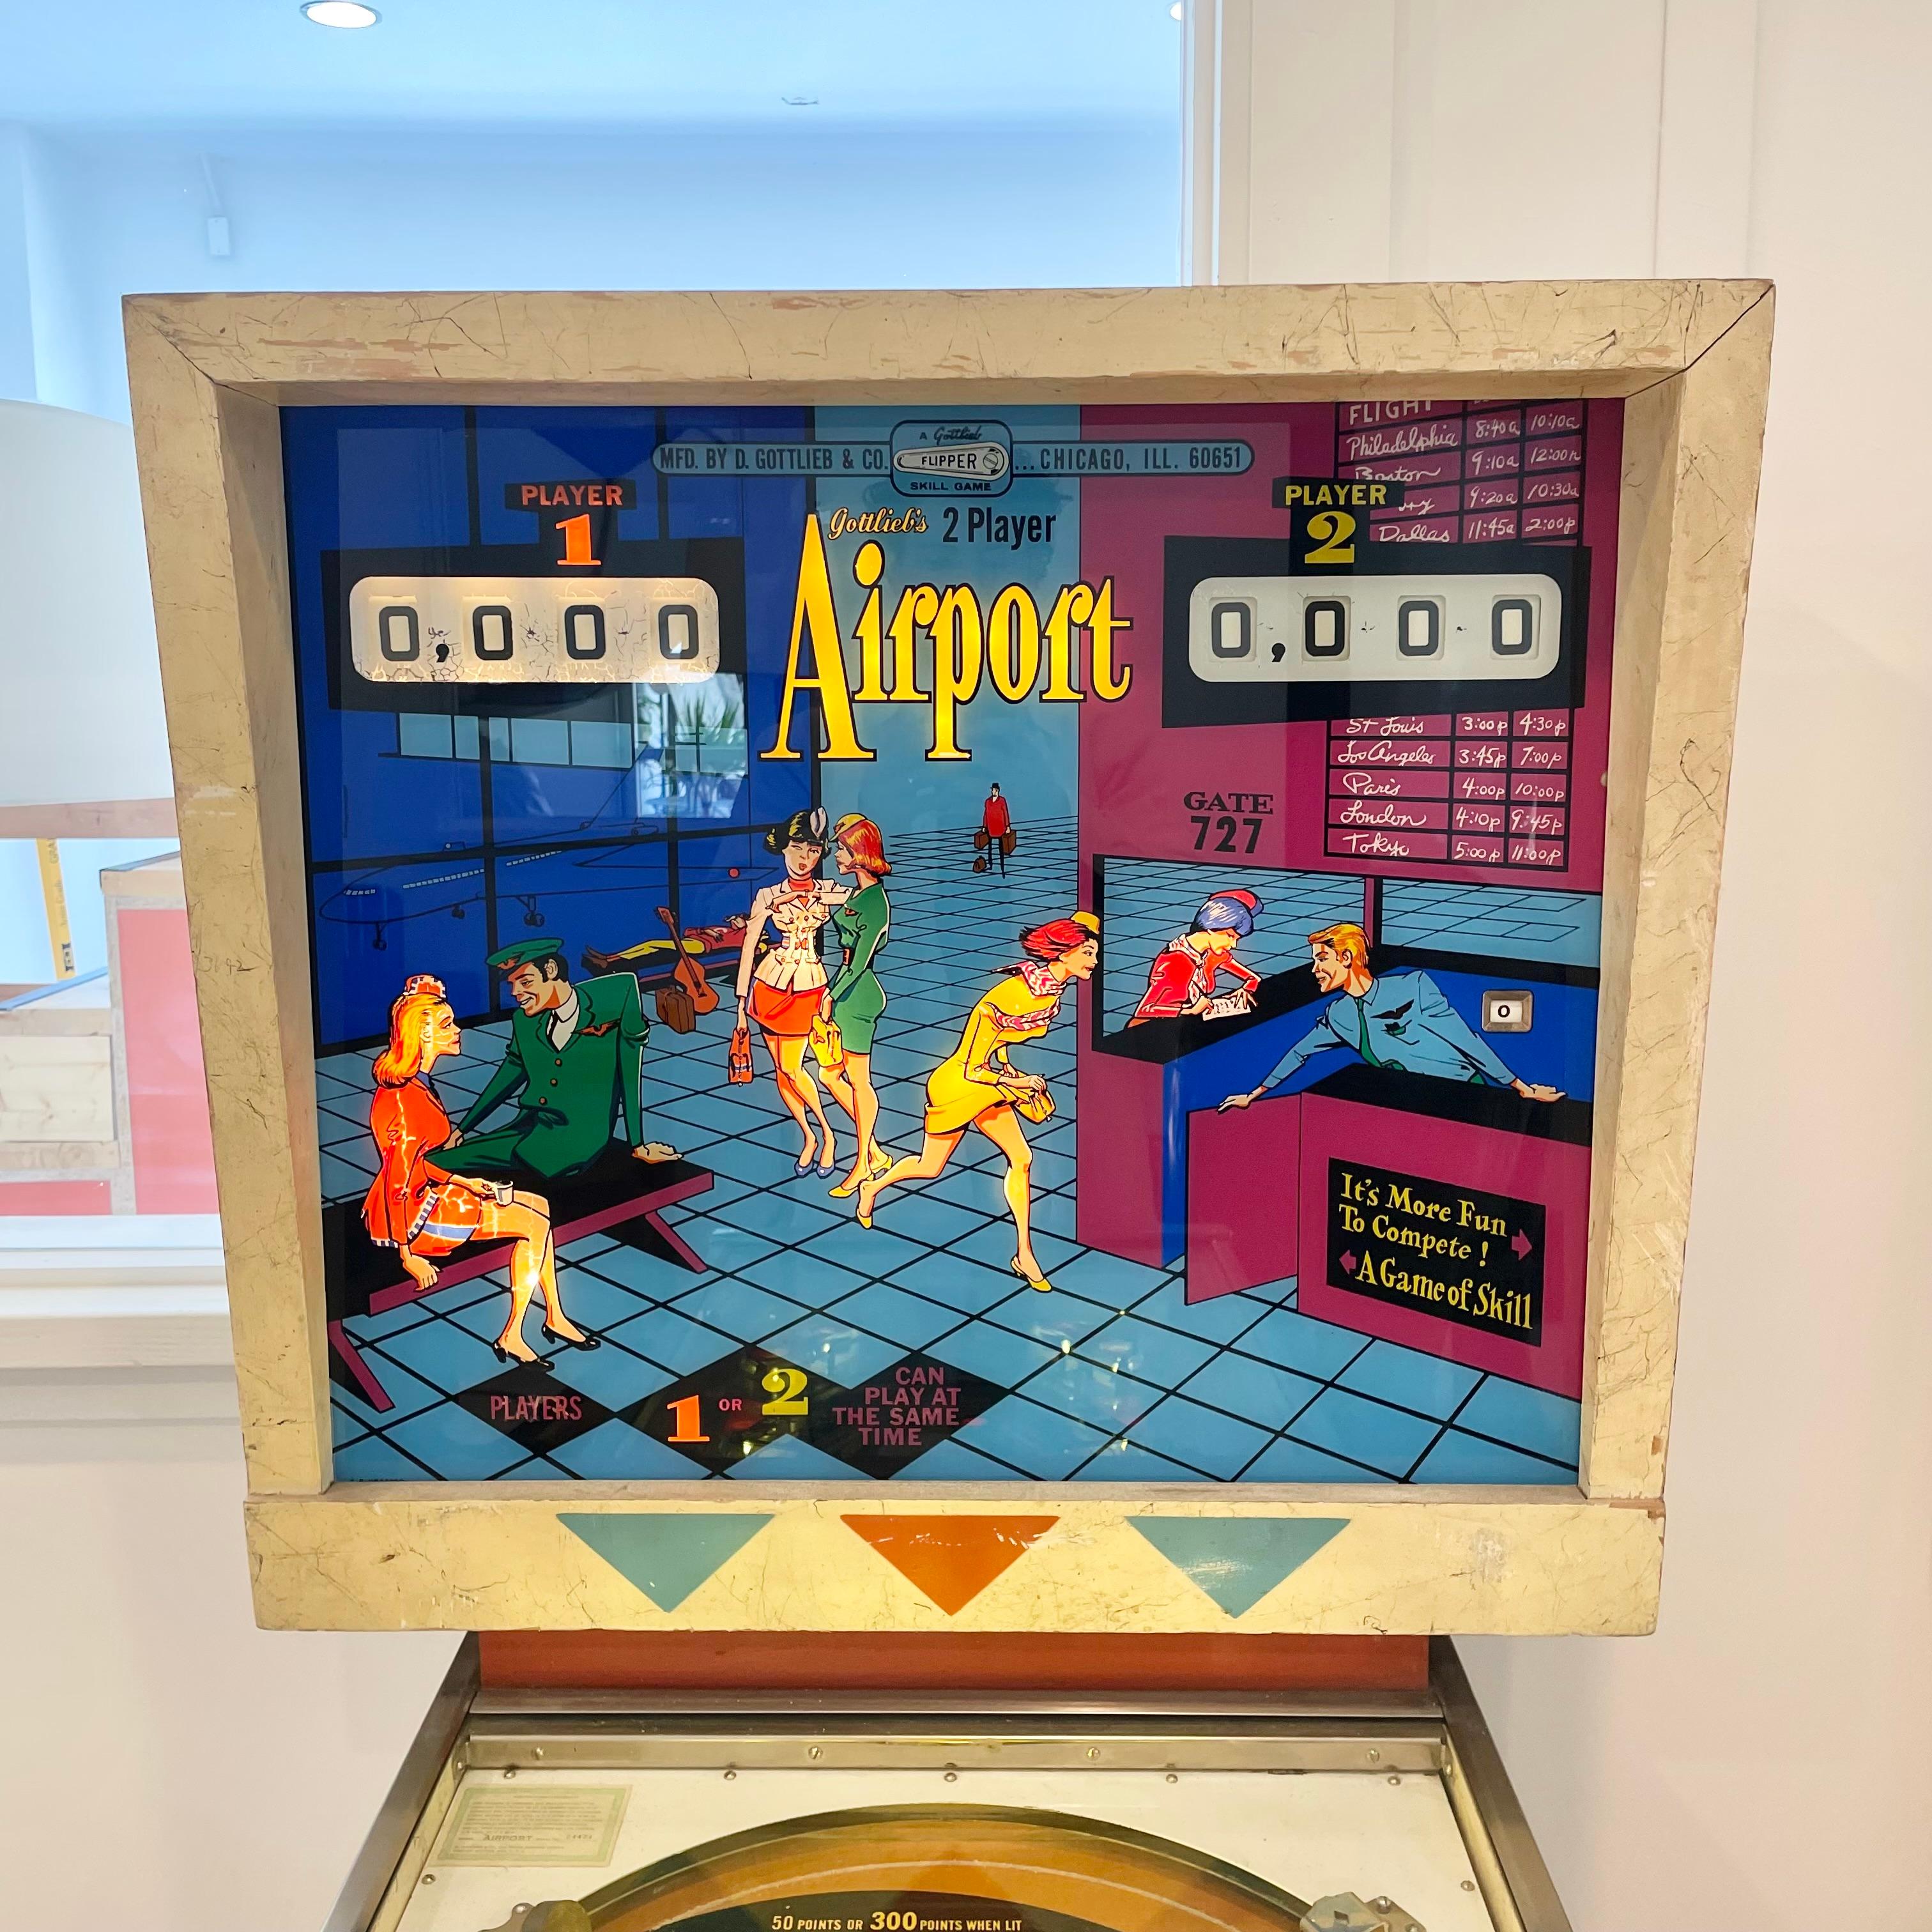 Vintage 'AIRPORT' pinball machine from 1969. Made by D. Gottlieb & Co. and designed by Ed Krynski. In excellent working condition and the first game to use a vari-target. Great visuals and sounds. Extremely fast paced game speed and very fun to